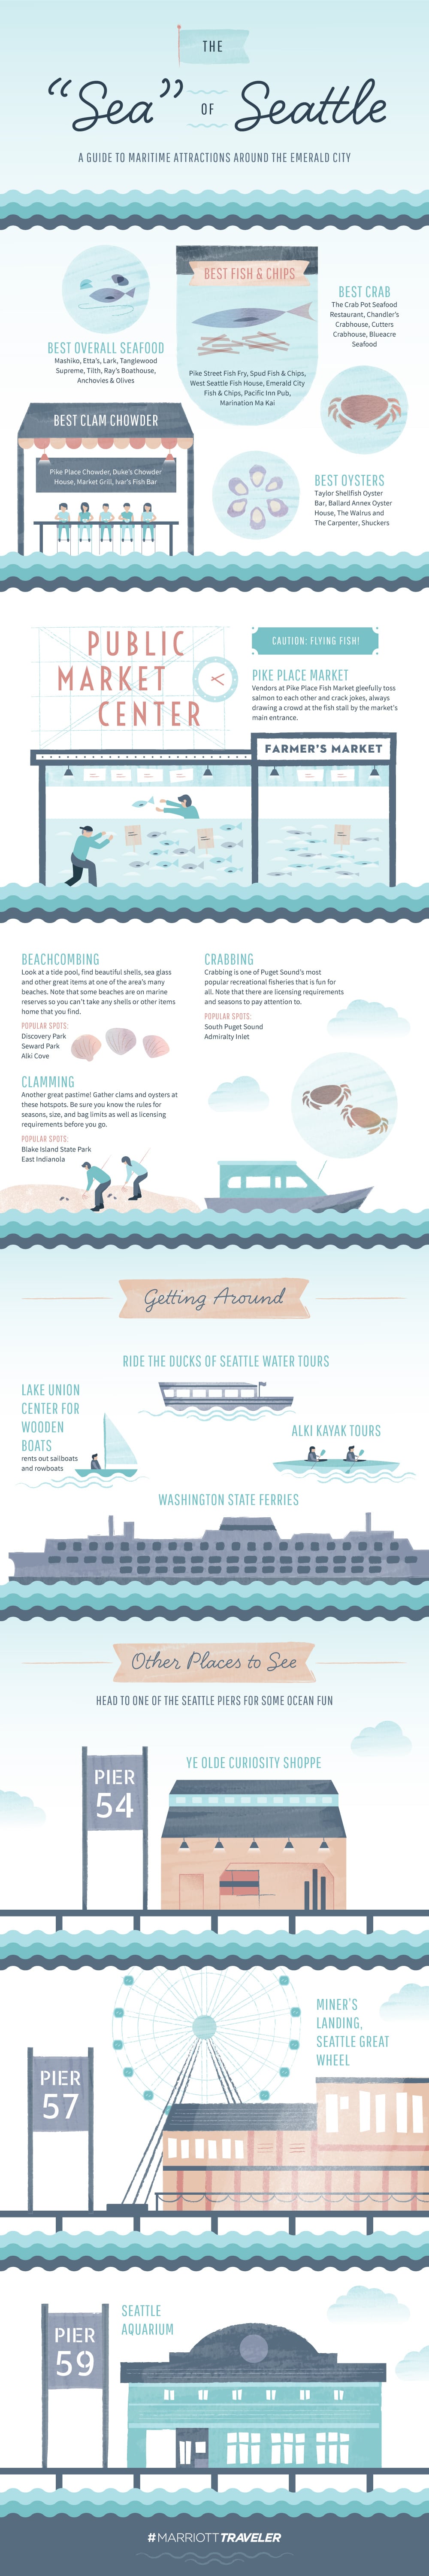 seattle sightseeing infographic